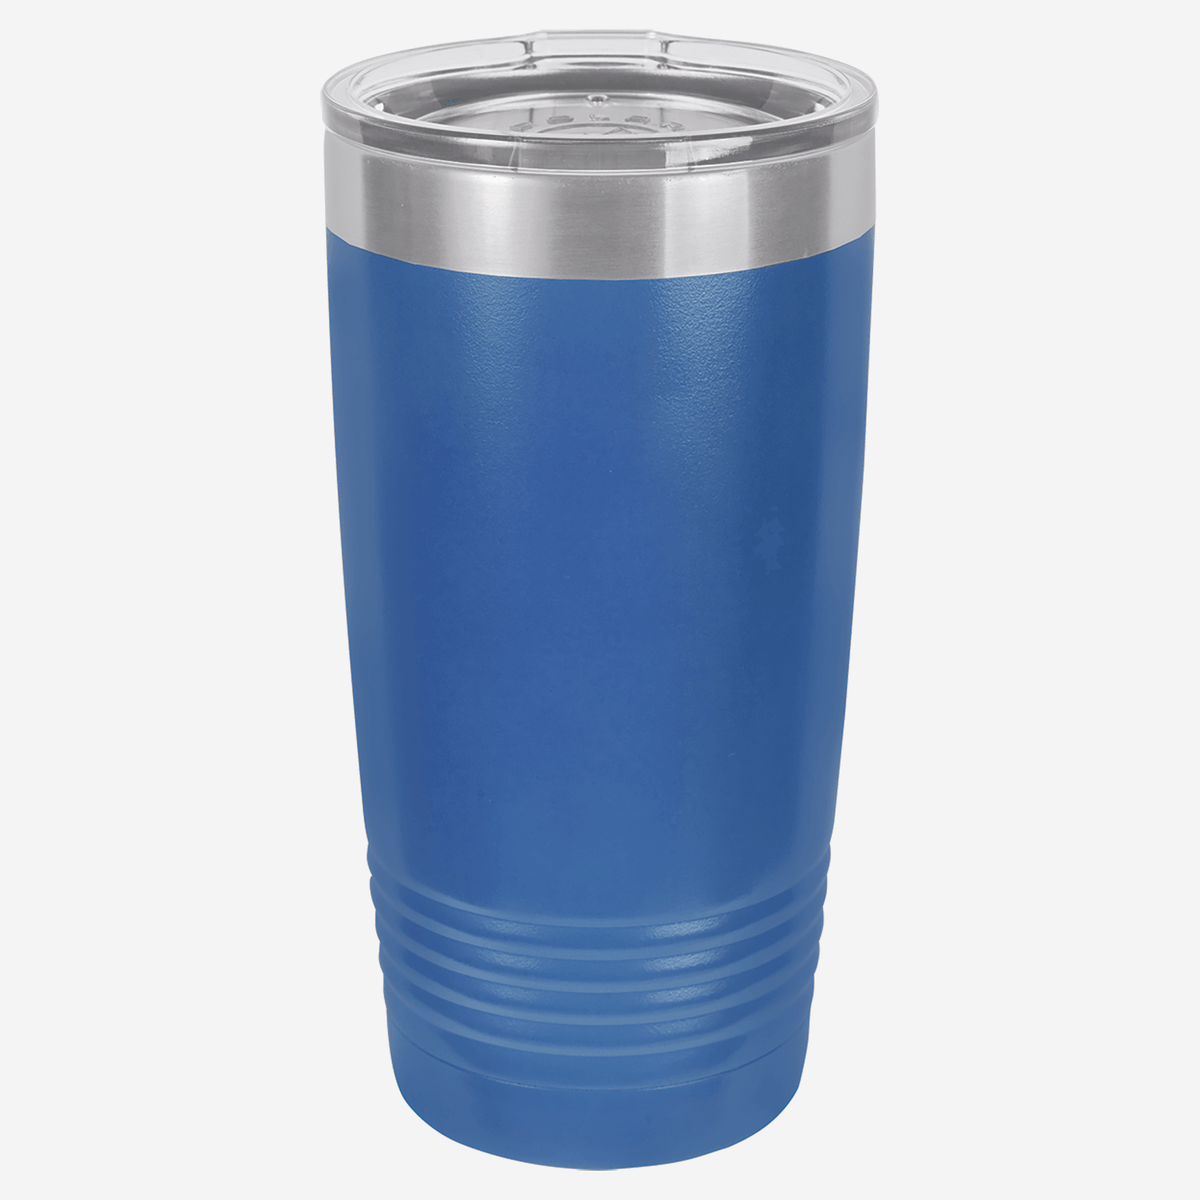 20 oz. royal blue stainless steel tumbler with lid grip rings on the bottom